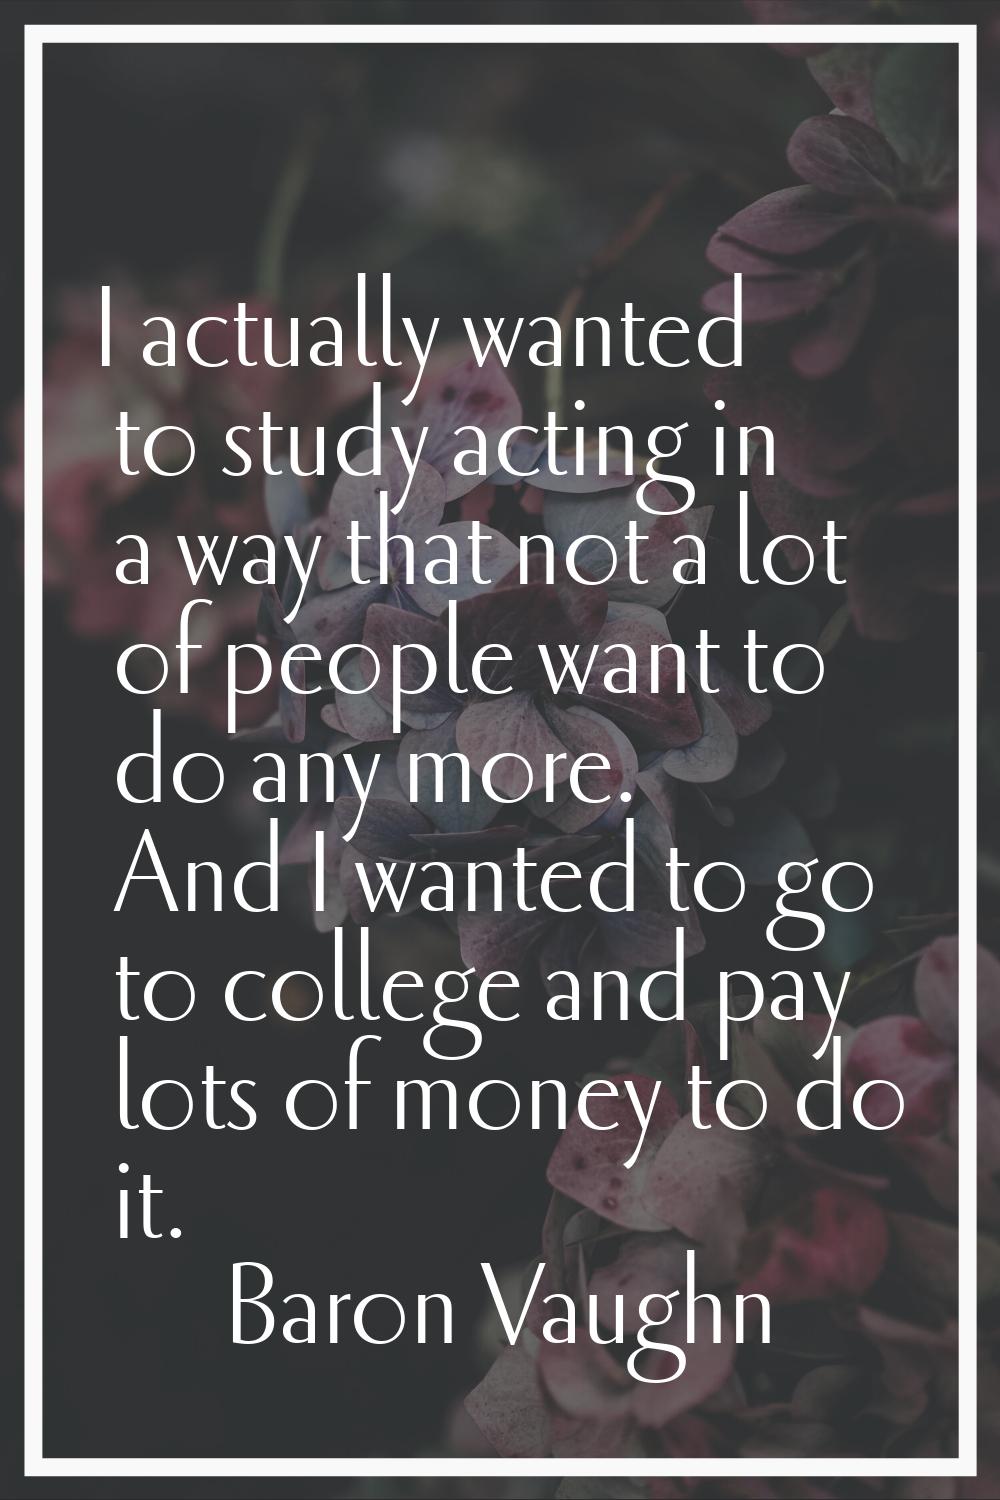 I actually wanted to study acting in a way that not a lot of people want to do any more. And I want